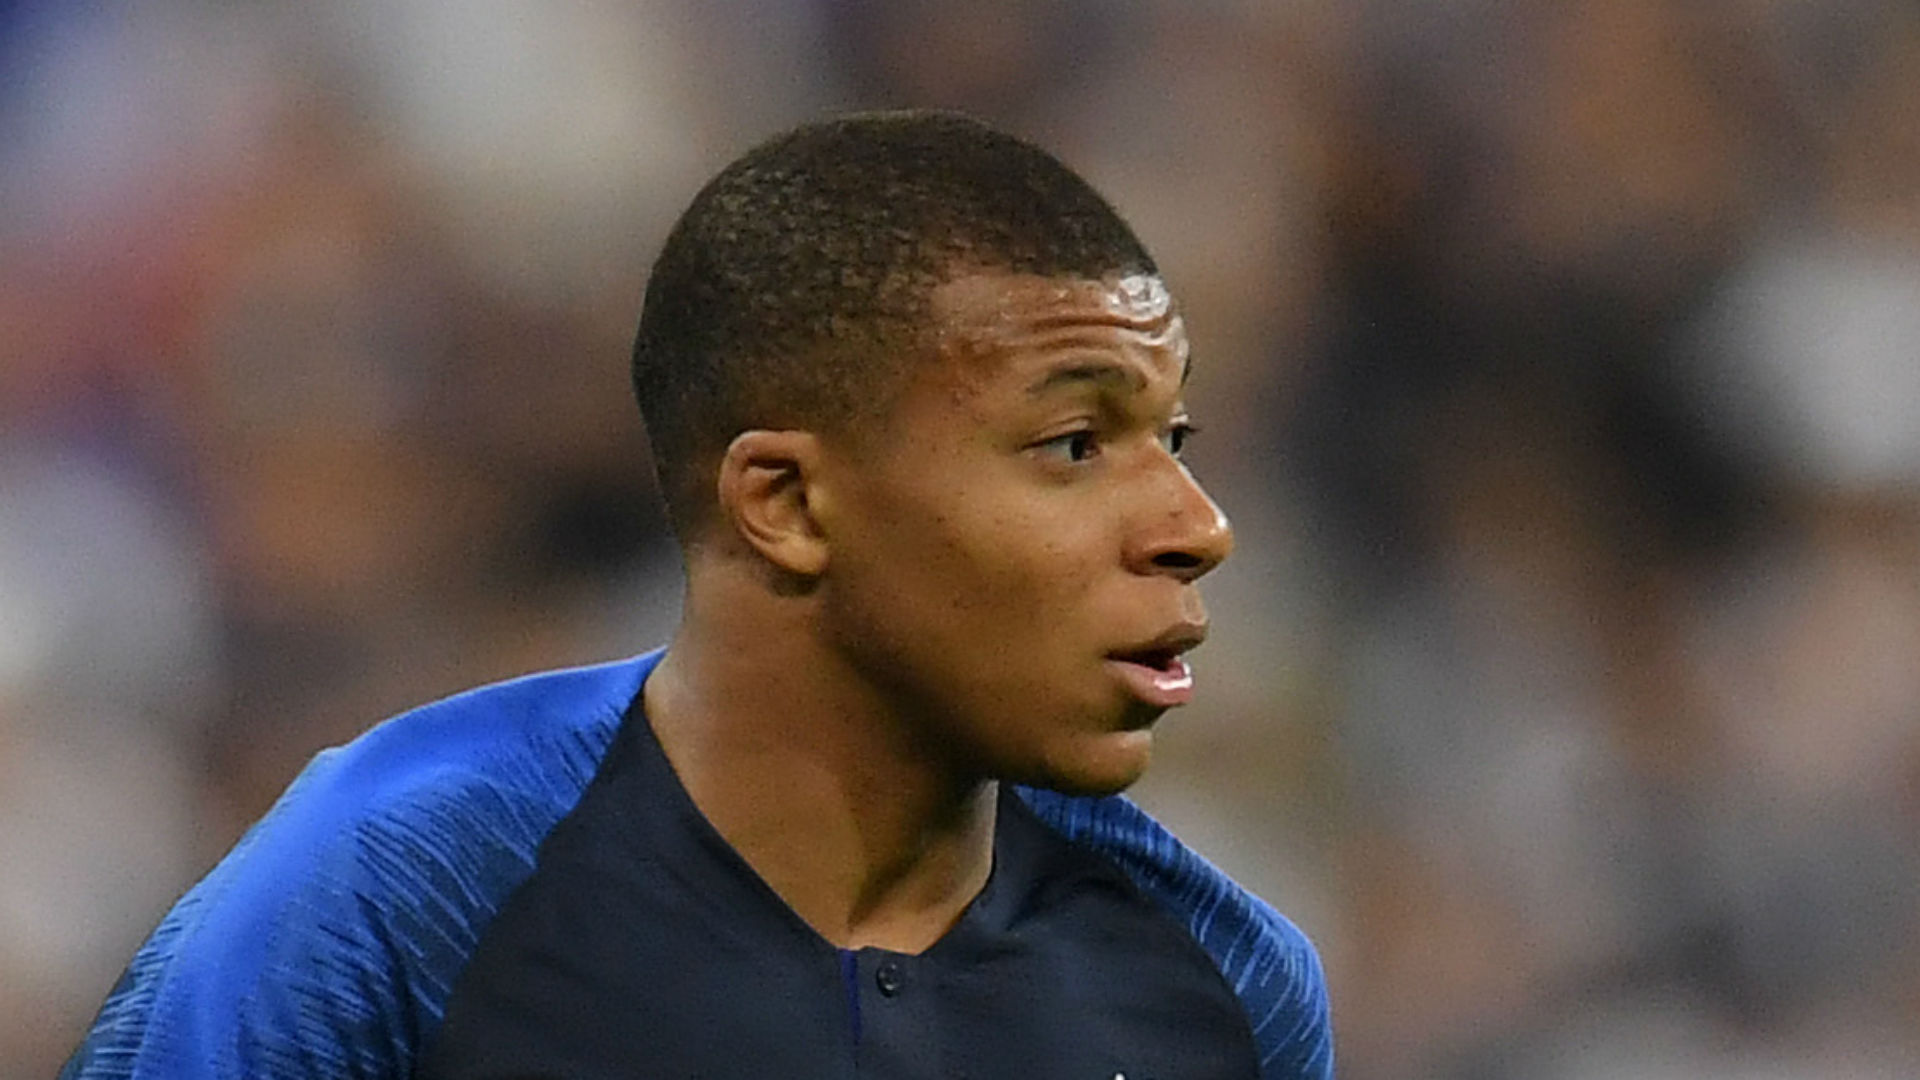 Mbappe on target as France maintains perfect start